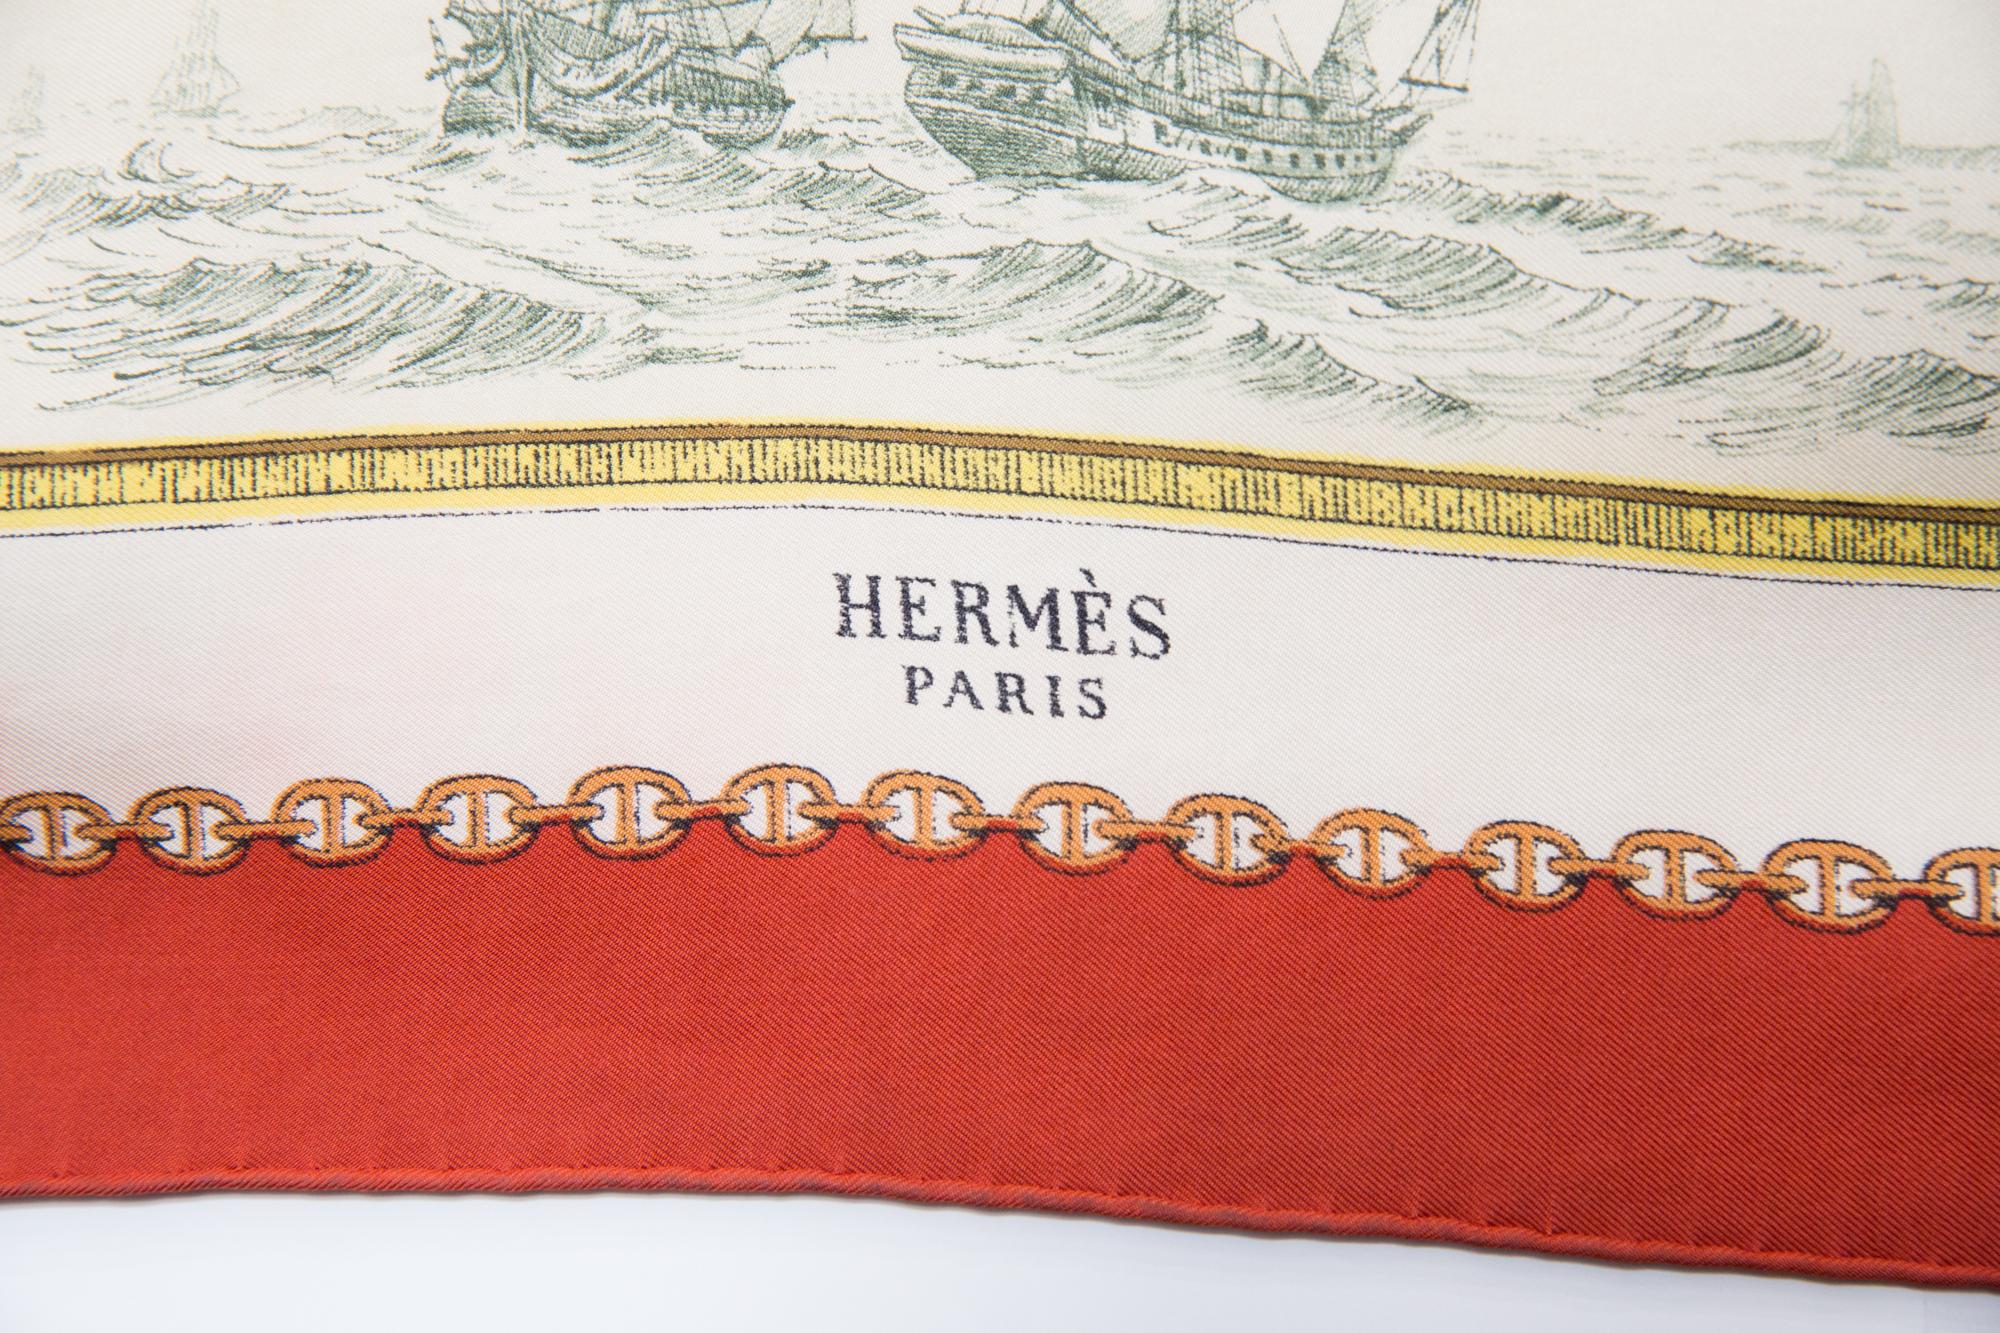 Rare Hermes Vieille Marine by P. Ledoux Silk Scarf For Sale 2